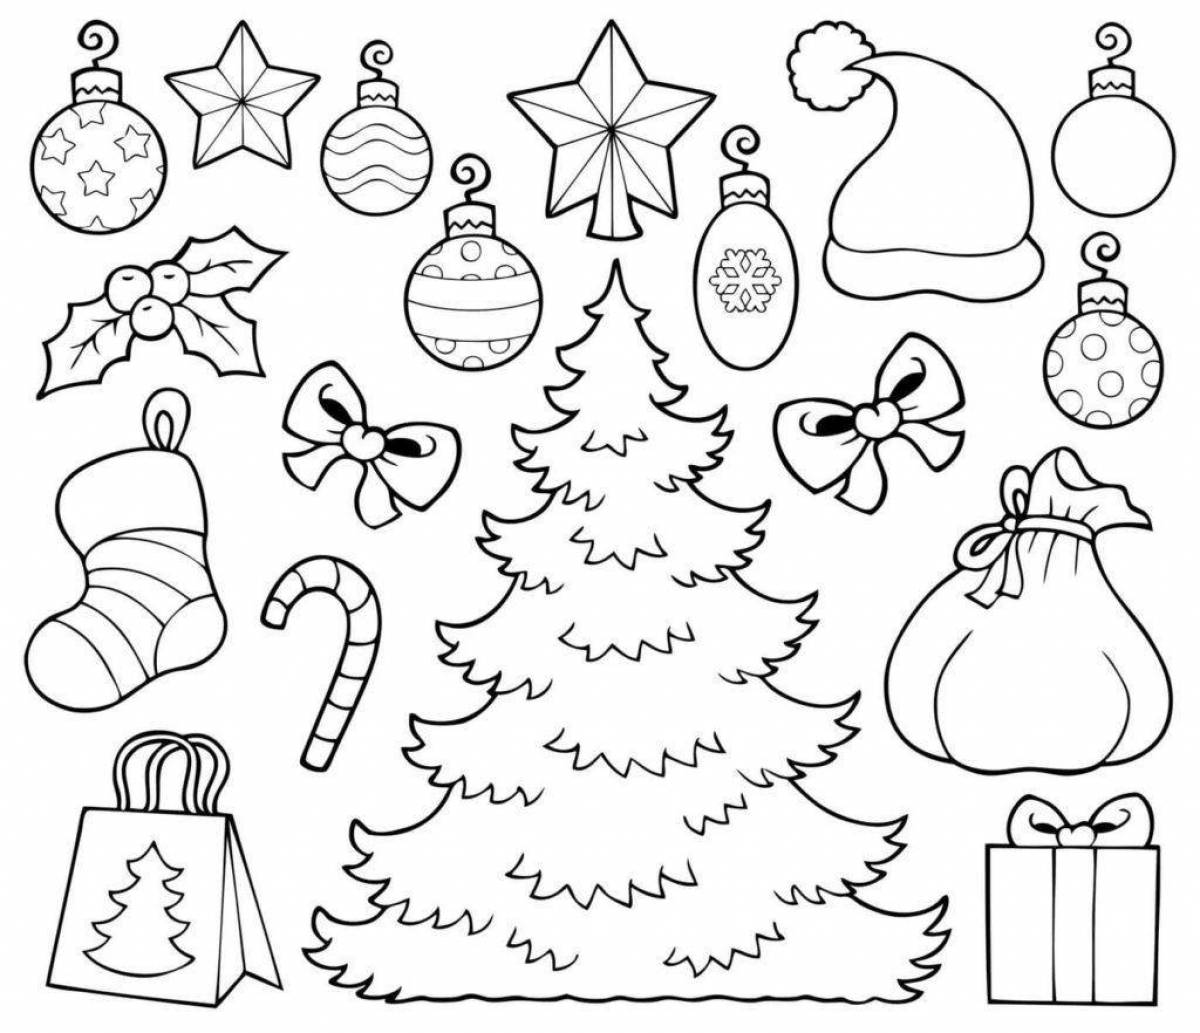 Glamorous little Christmas coloring book